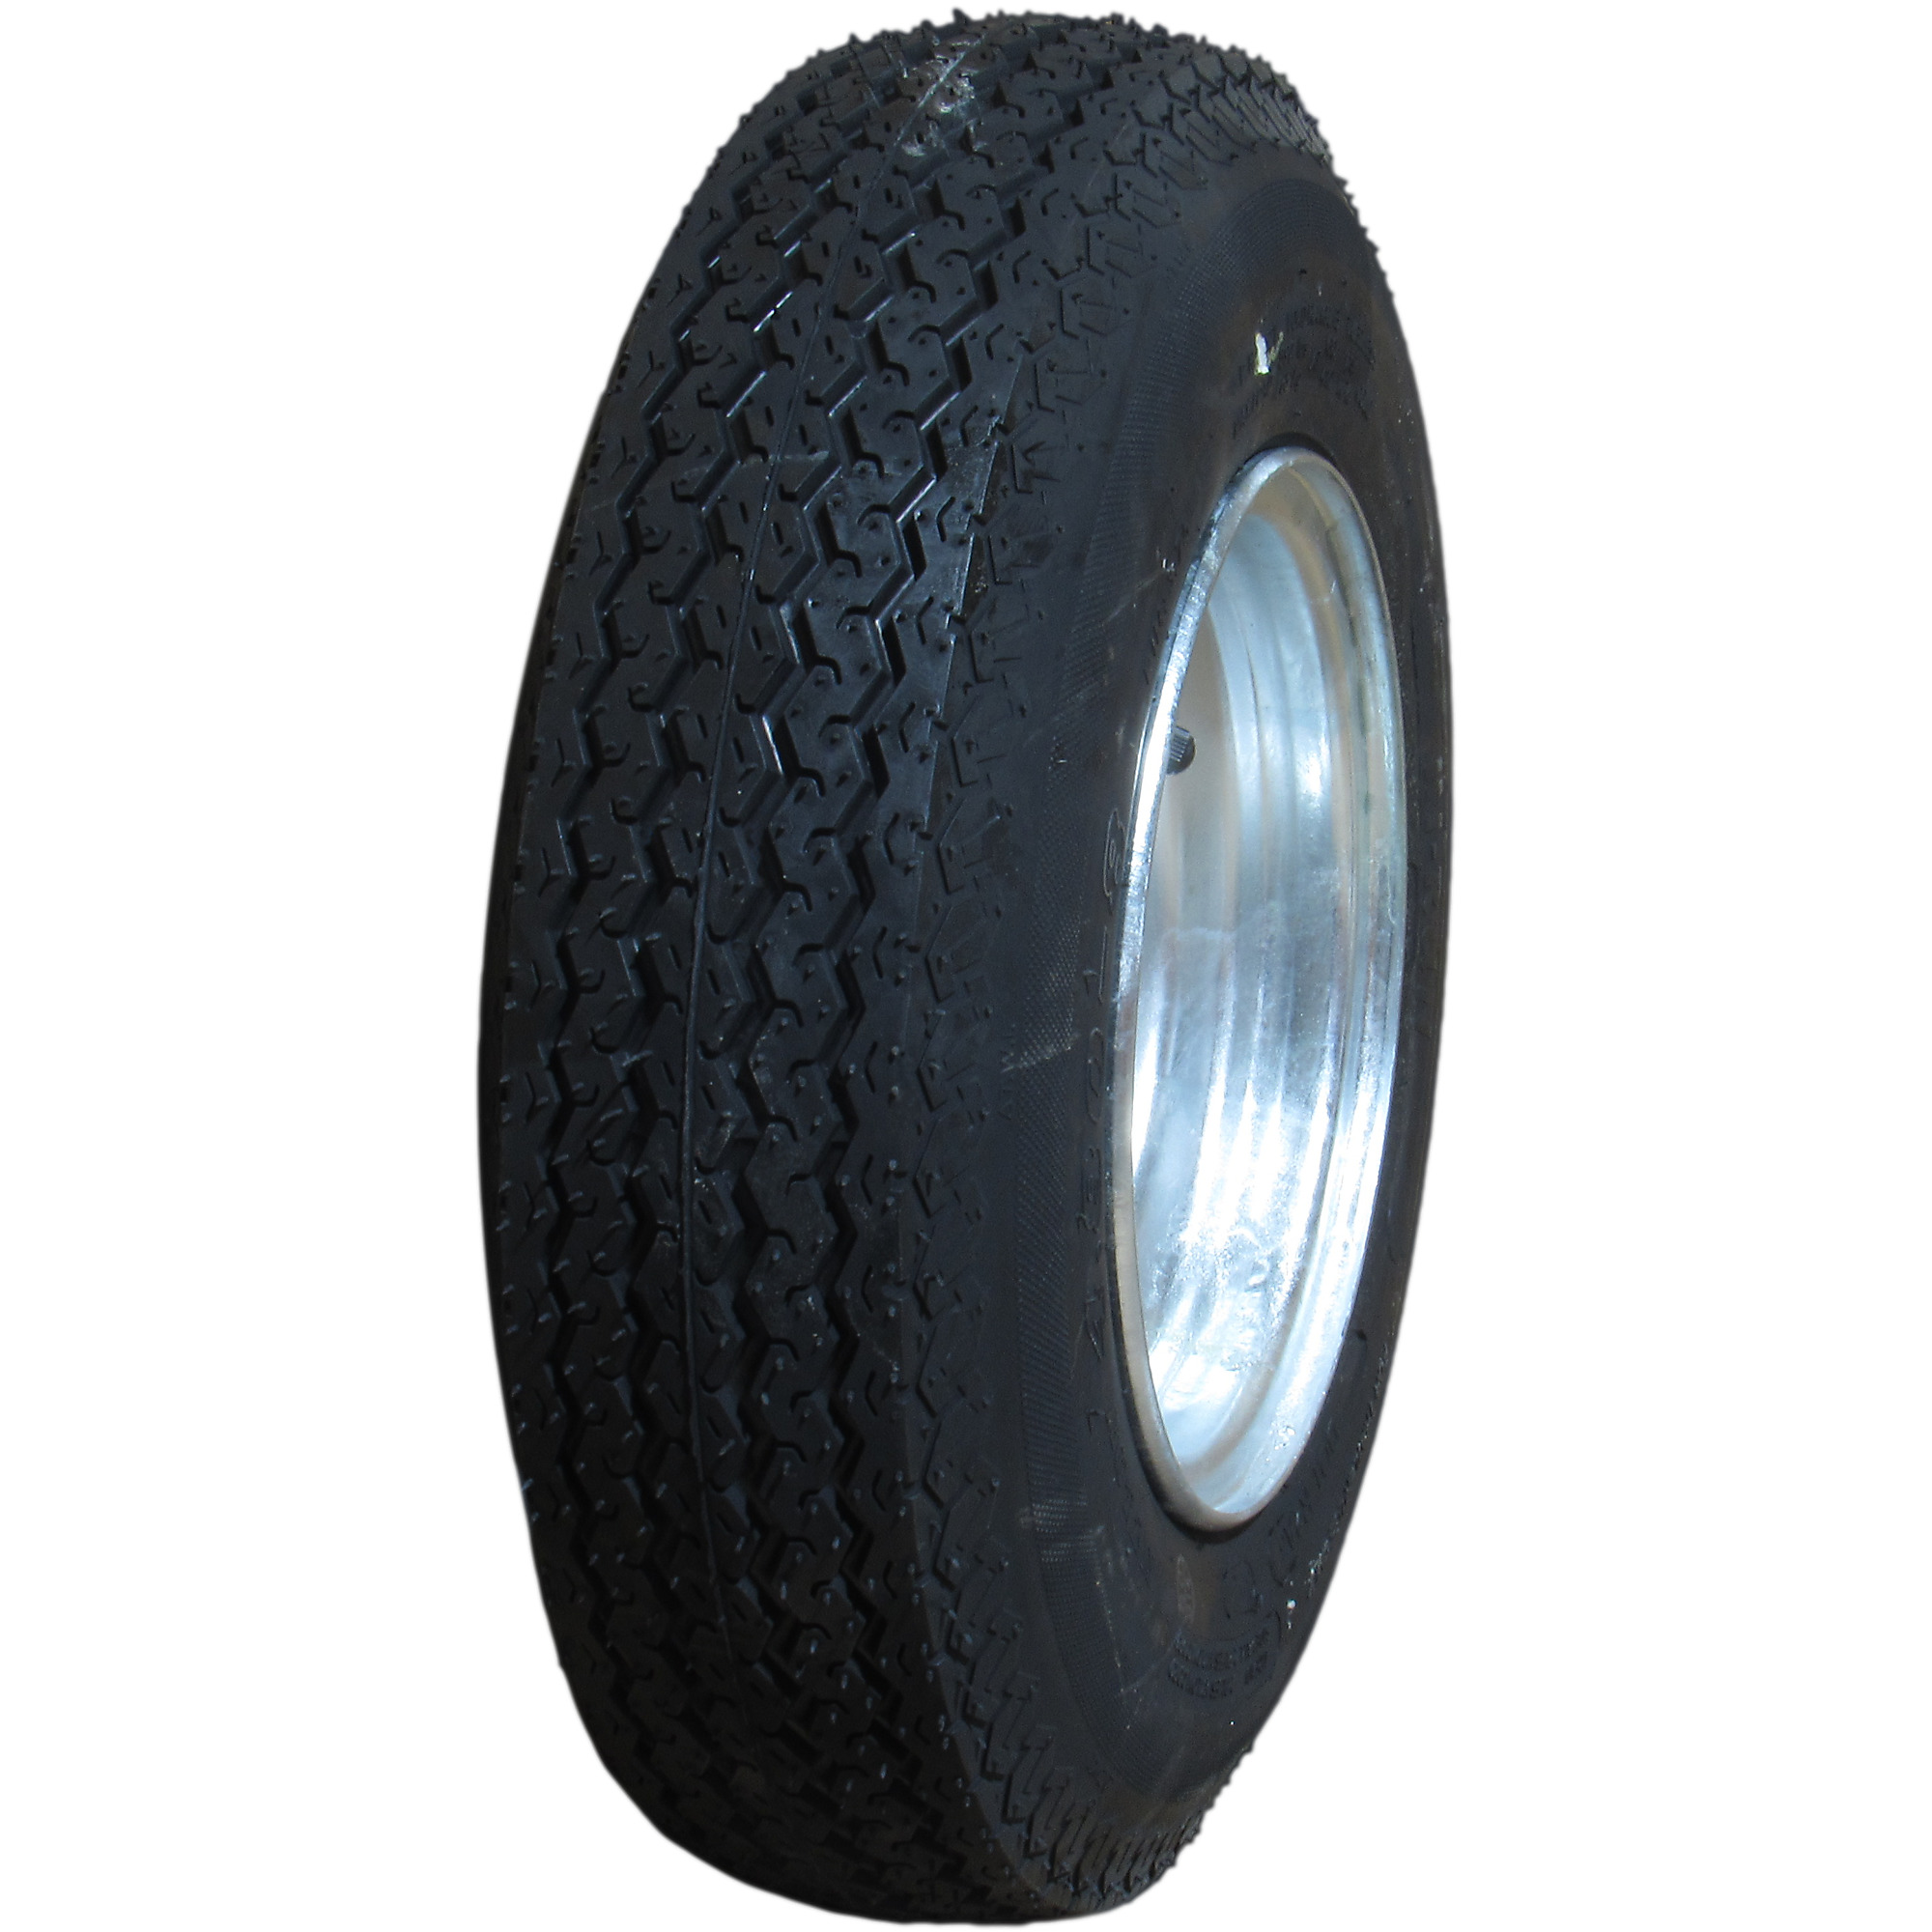 HI-RUN, Highway Trailer Tire Assembly, Galvanized, Tire Size 5.30-12 Load Range Rating C, Bolt Holes (qty.) 5 Model ASB1055